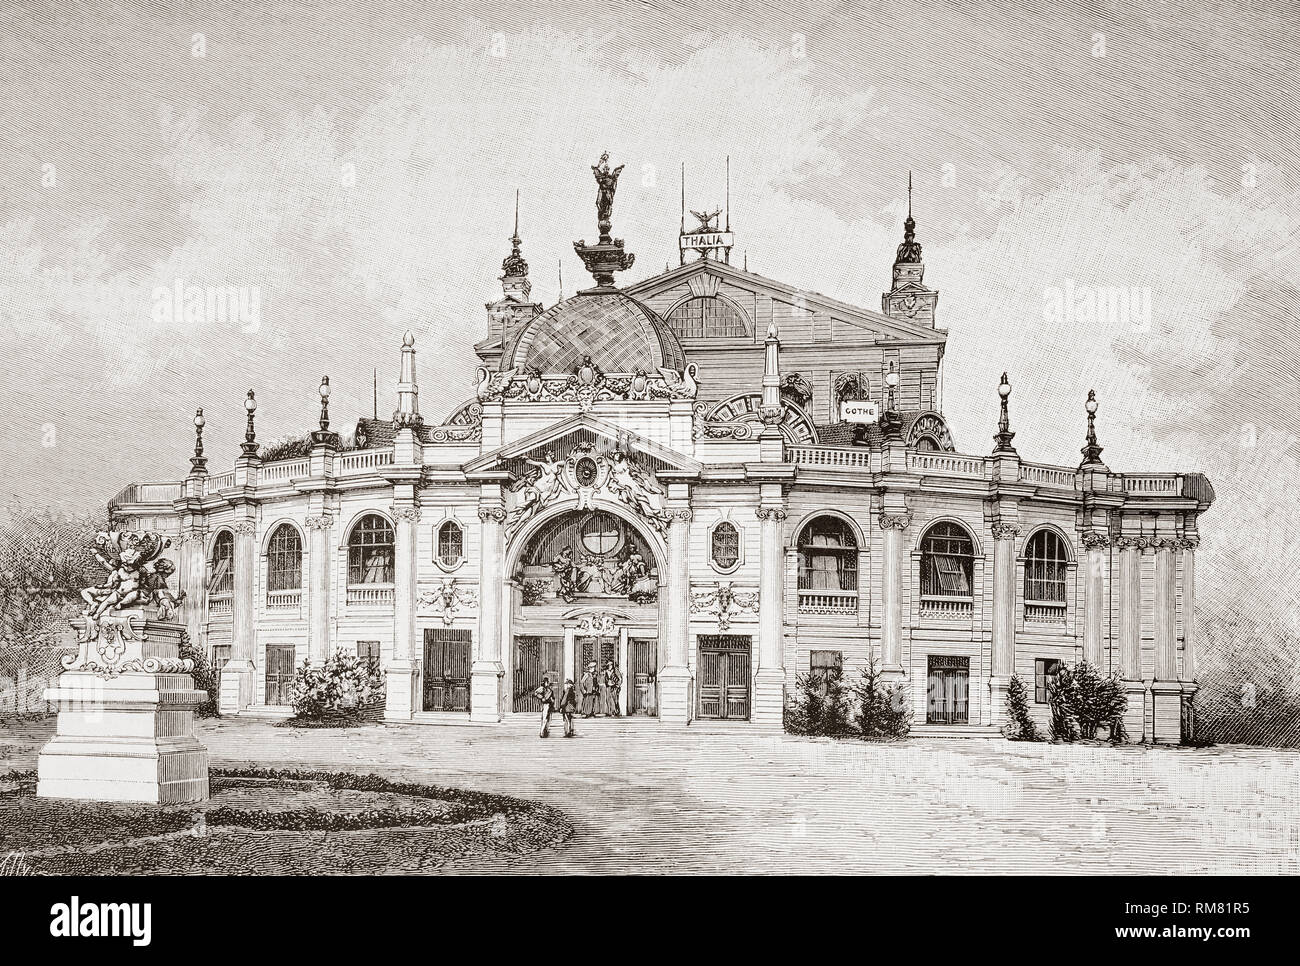 Facade of international theatre, designed by architects Ferdinand Fellner (1849-1919) and Hermann Helmer (1849-1919), Vienna, Austria, seen here in the 19th century.  From La Ilustracion Espanola y Americana, published 1892. Stock Photo